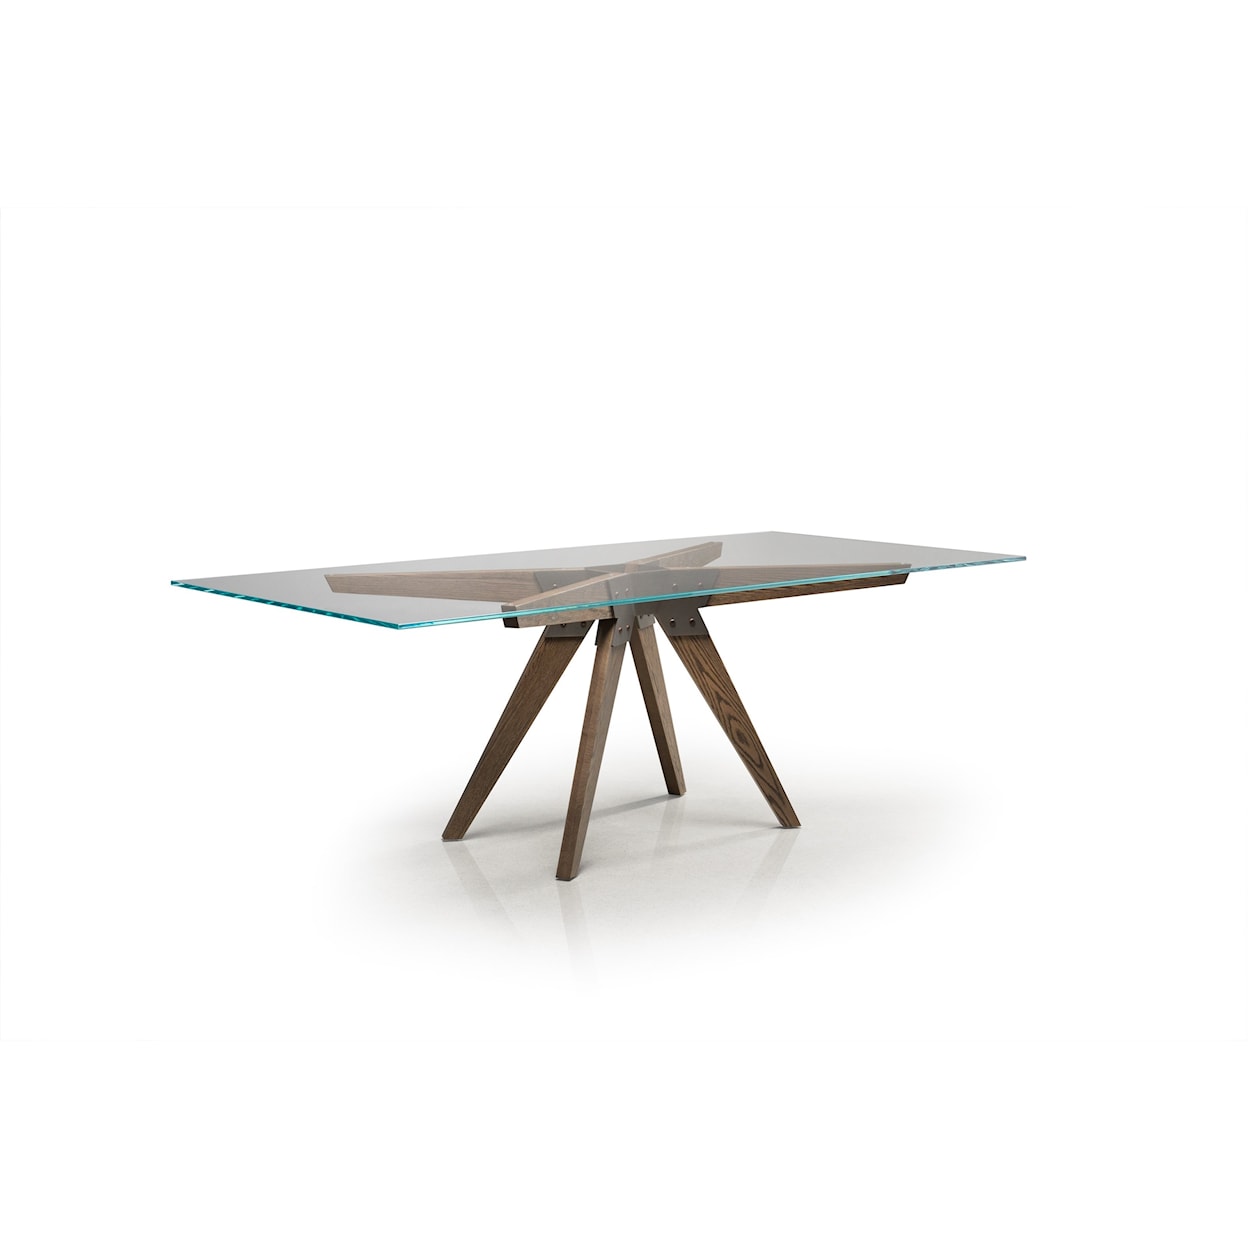 Trica Contemporary Tables Soul Dining Table